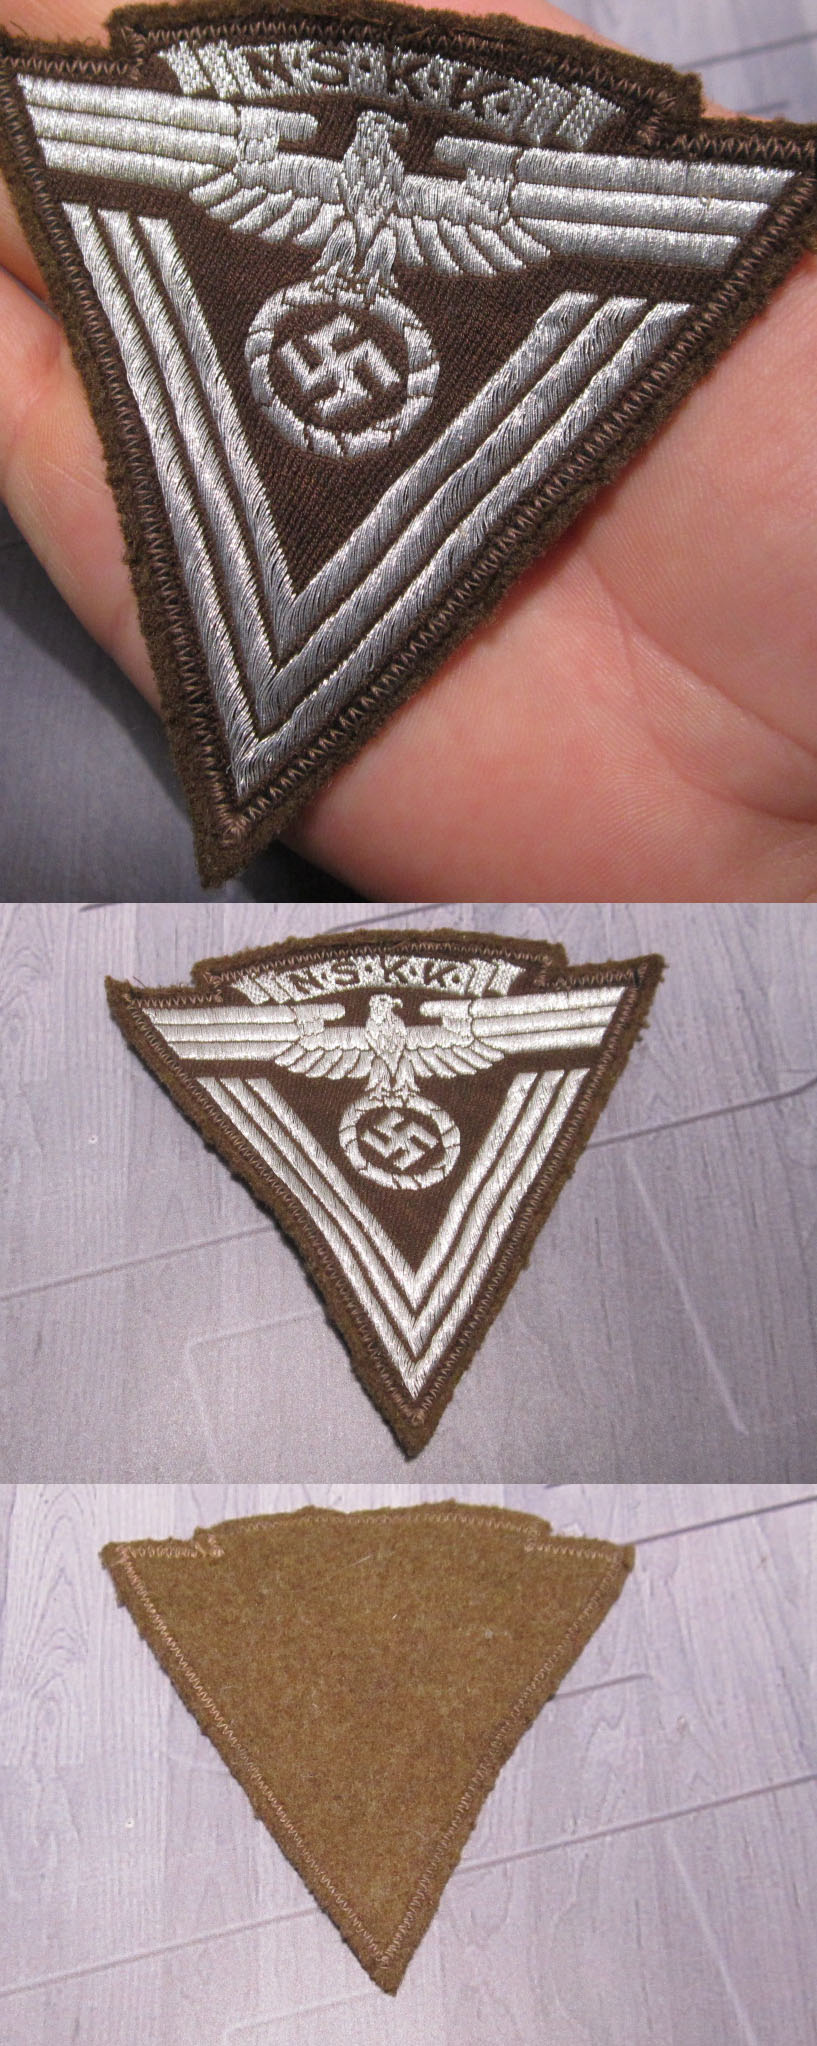 NSKK “Old Fighters” Sleeve Eagle with Chevrons